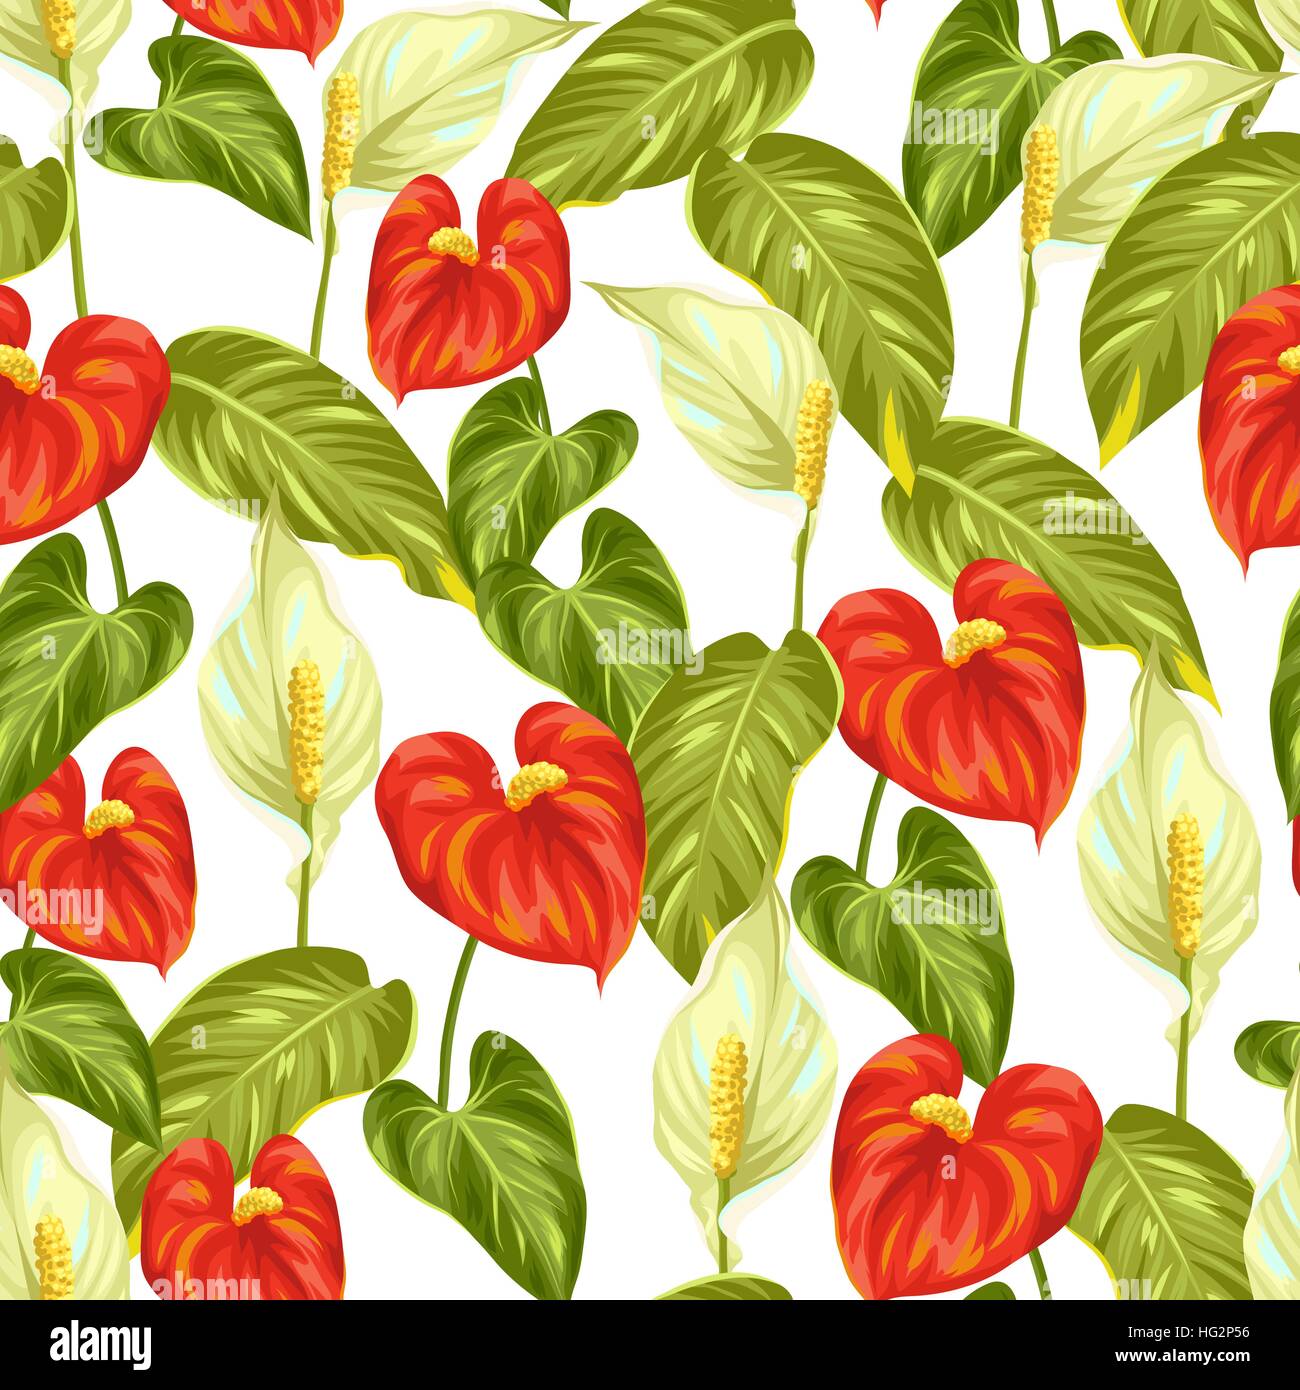 Seamless pattern with flowers spathiphyllum and anthurium Stock Vector